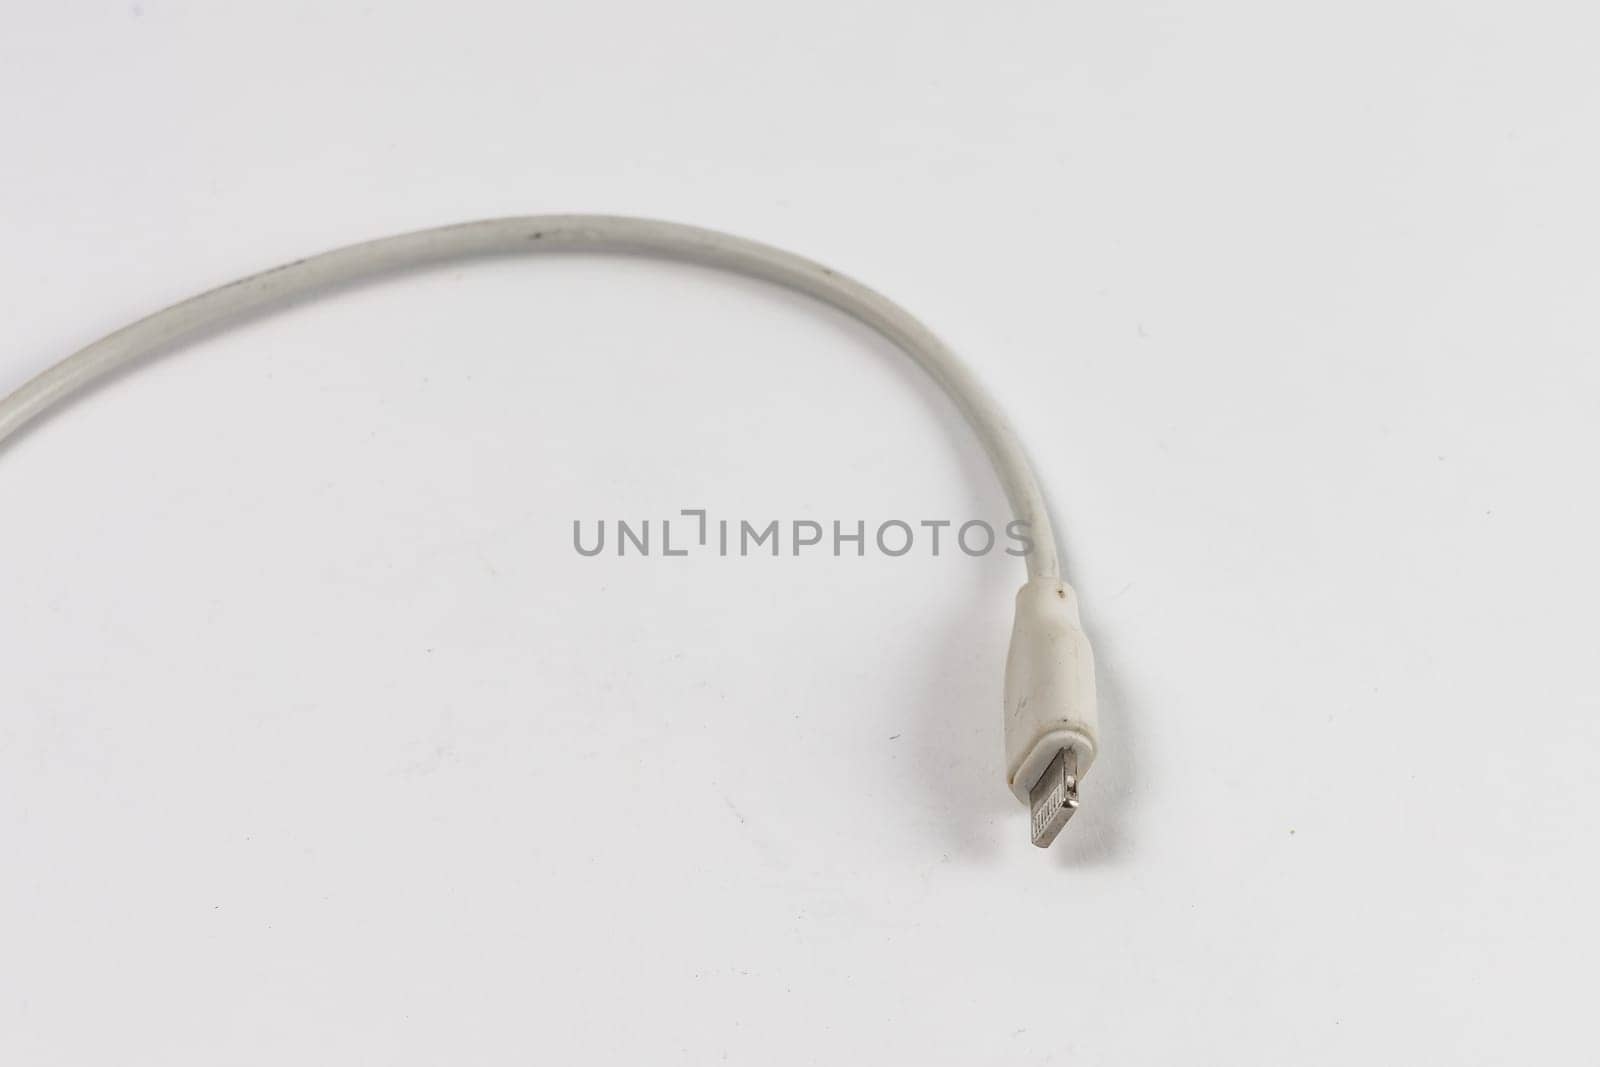 Long white cable with Lightning connector at the end for iPhone chargers by Wierzchu